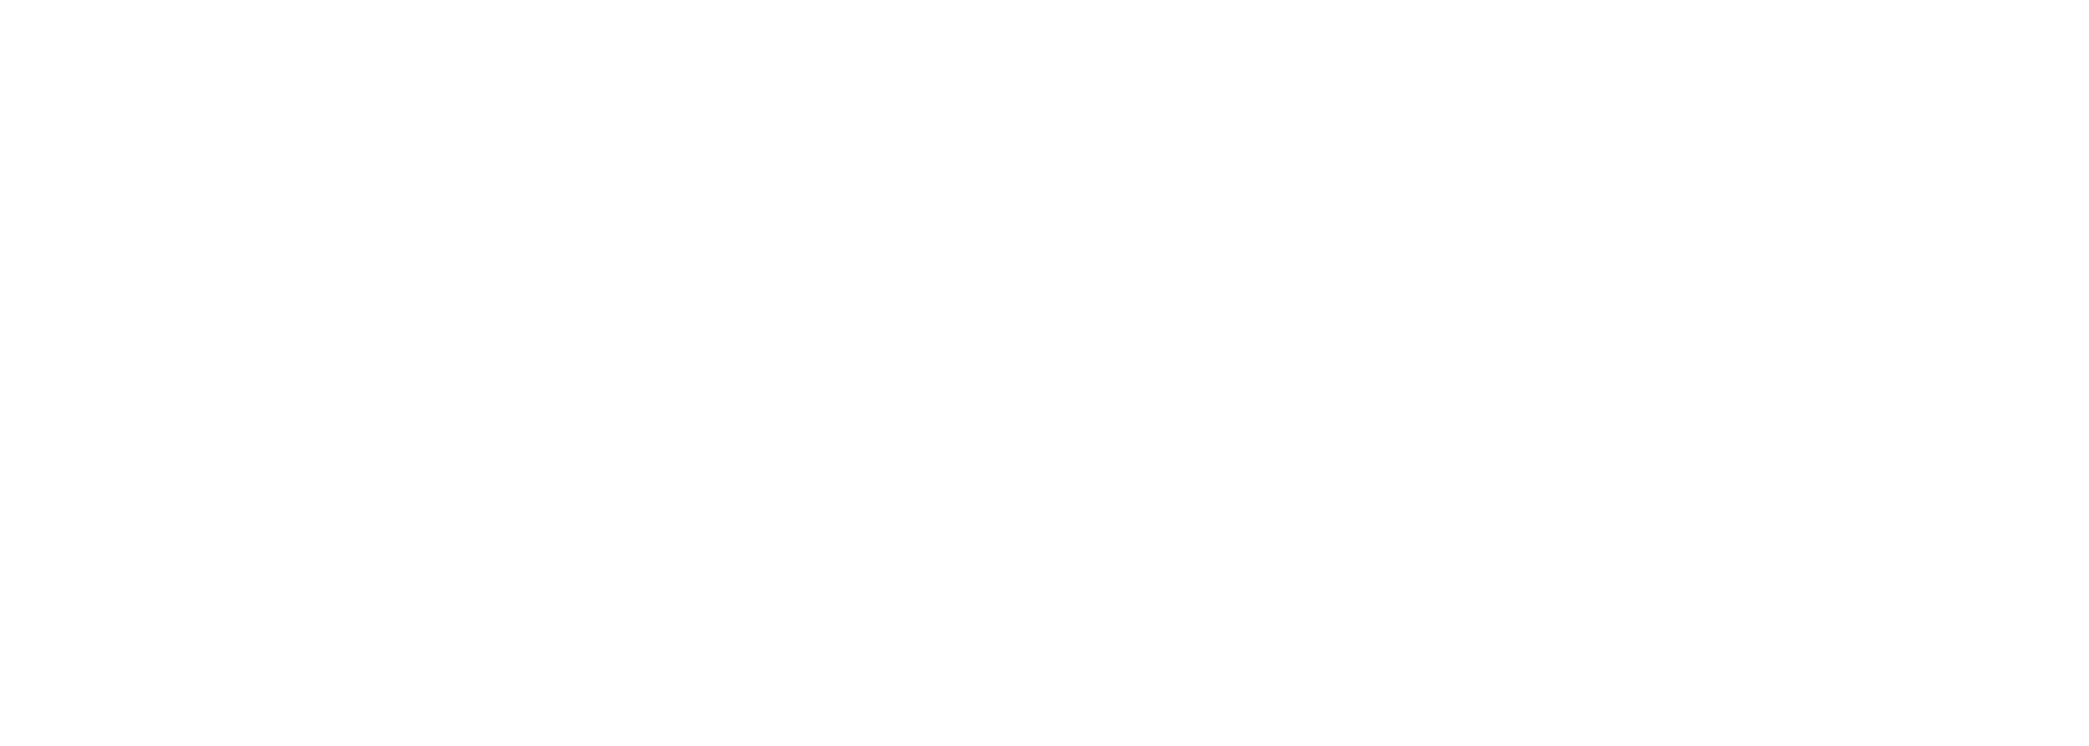 CITeR: Center for Identification Technology Research